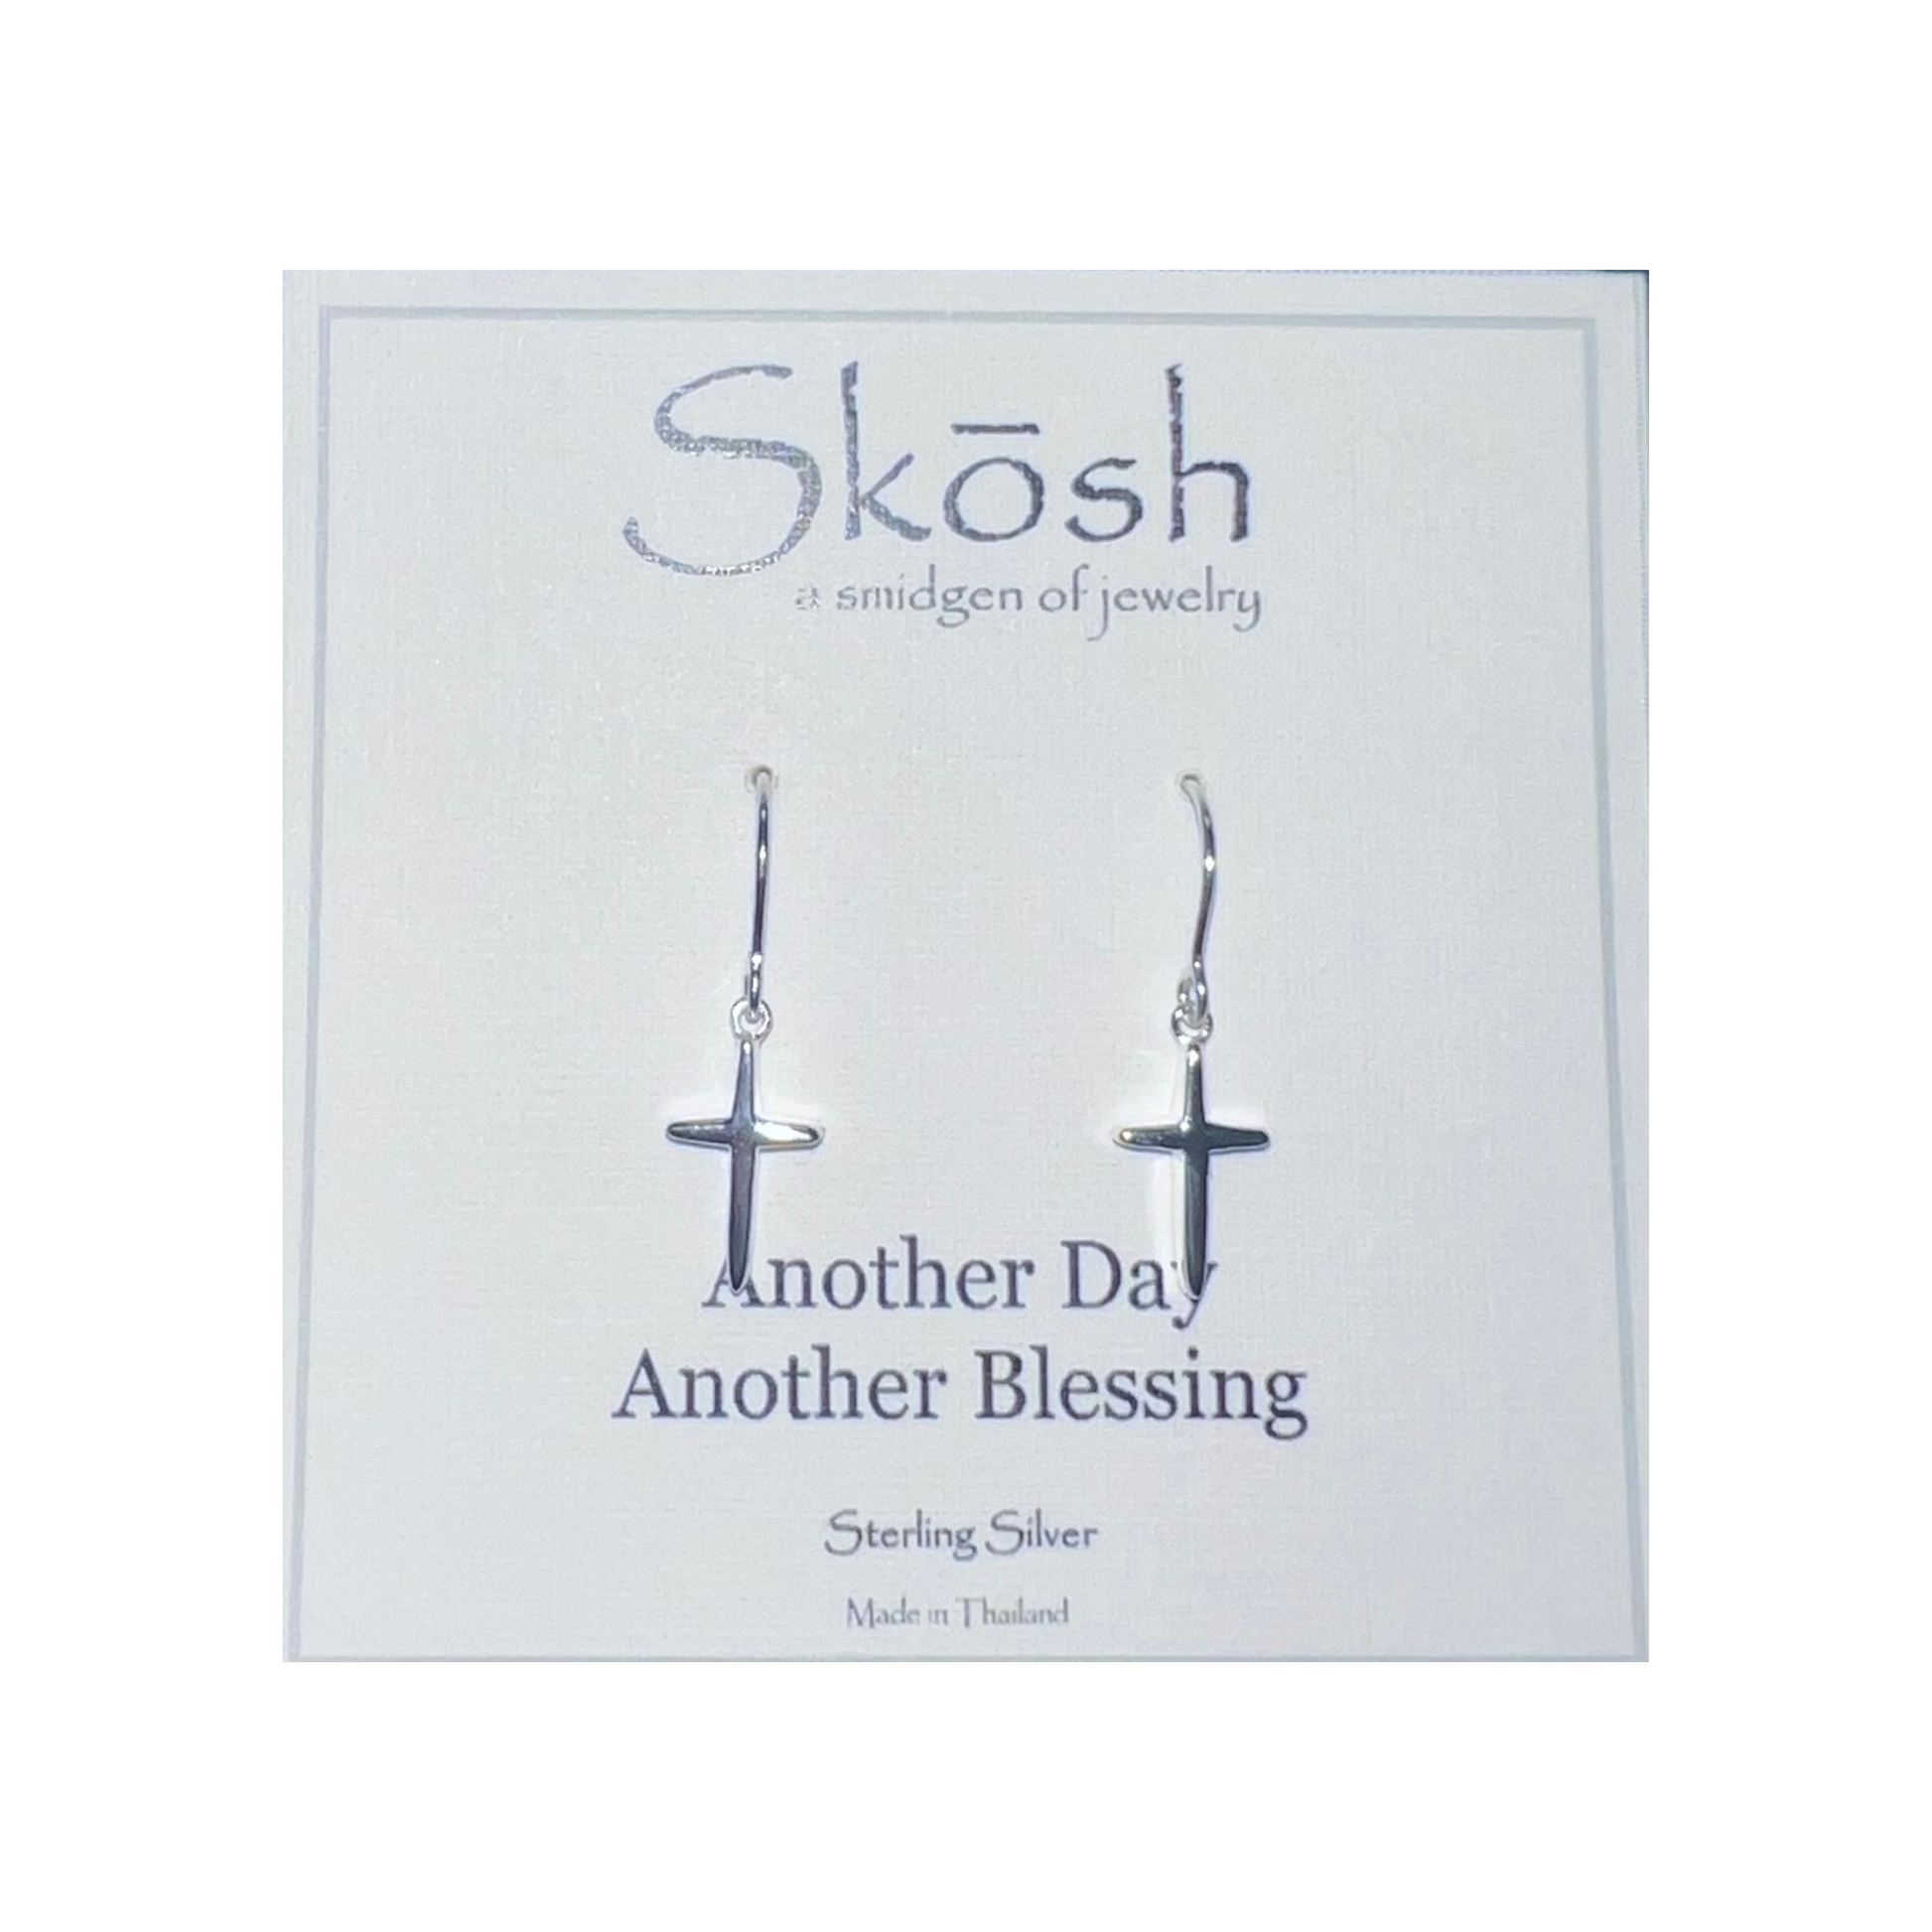 Accent your look with a classic style. These Cross Earrings feature a unique dangle design that comes in either silver or gold. Complete your wardrobe with a timeless and elegant accessory!